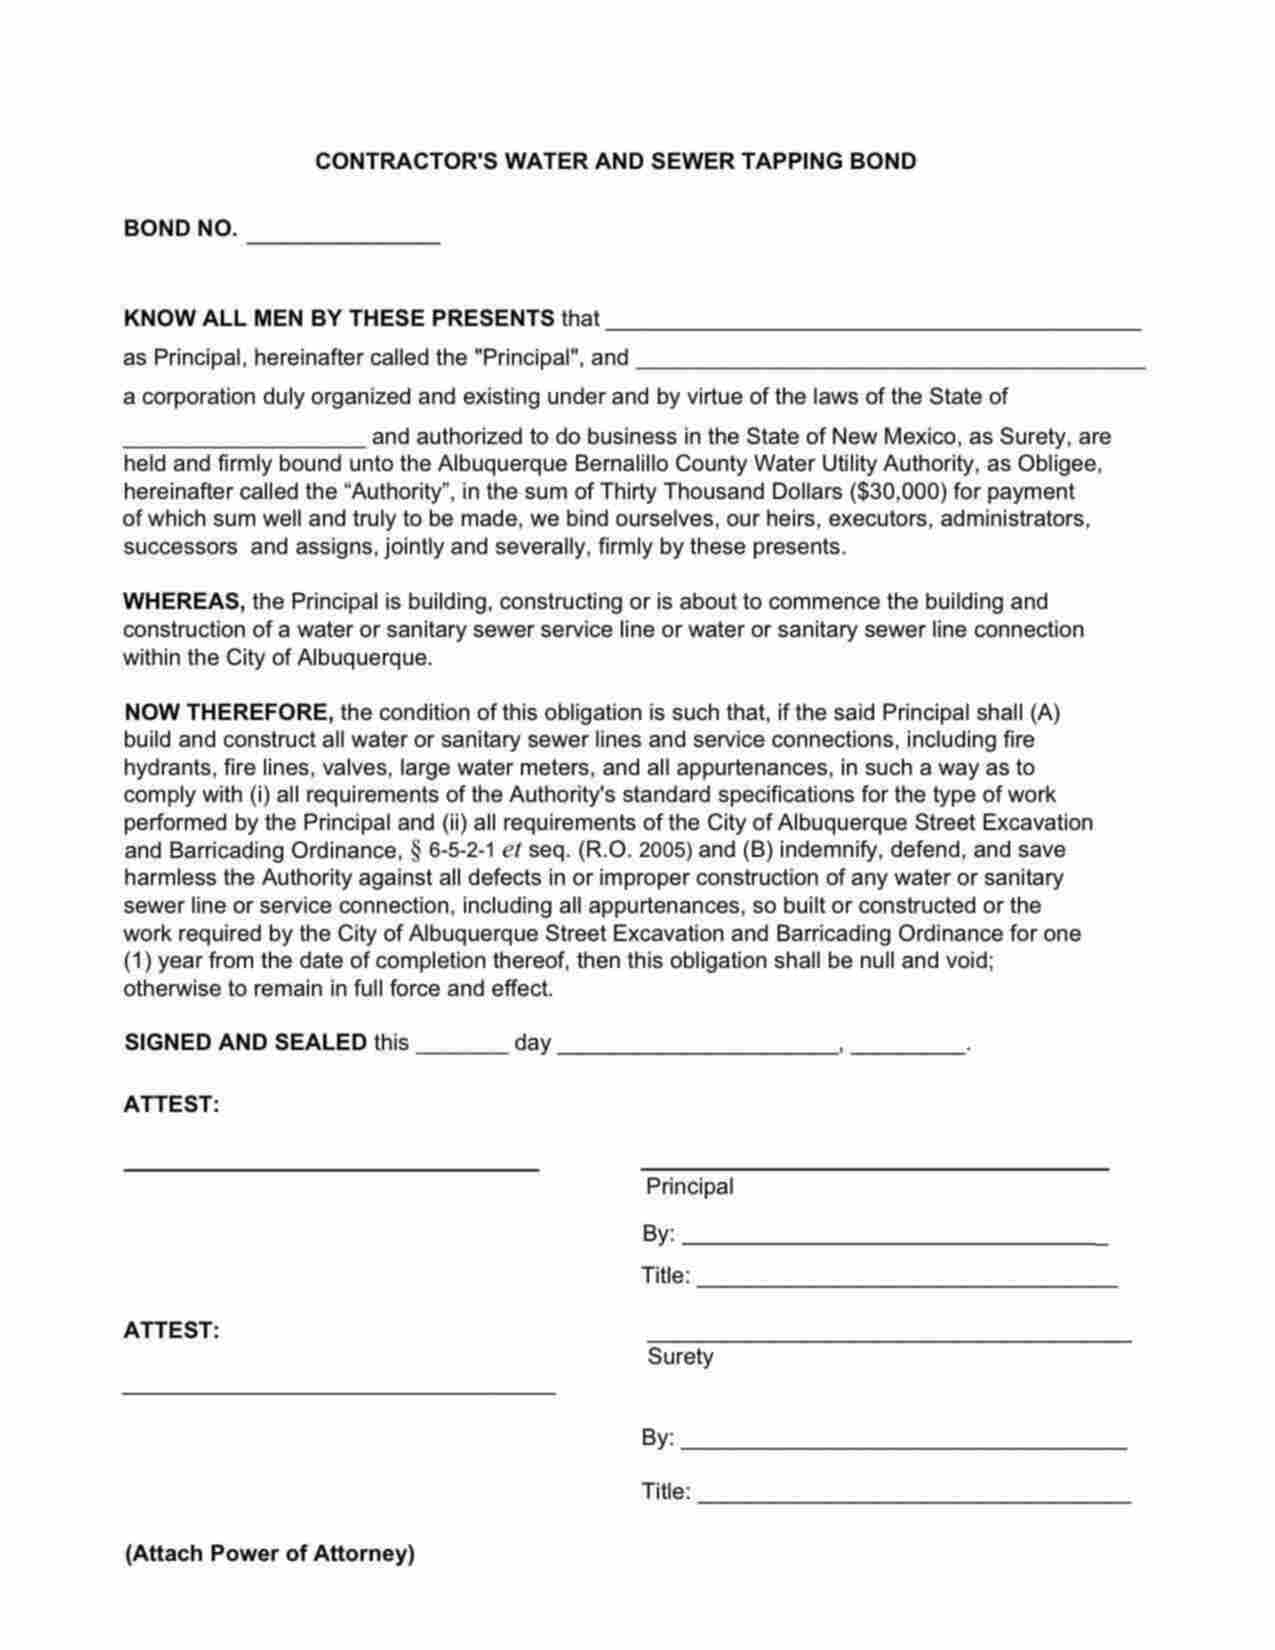 New Mexico Contractor's Water and Sewer Tapping Bond Form